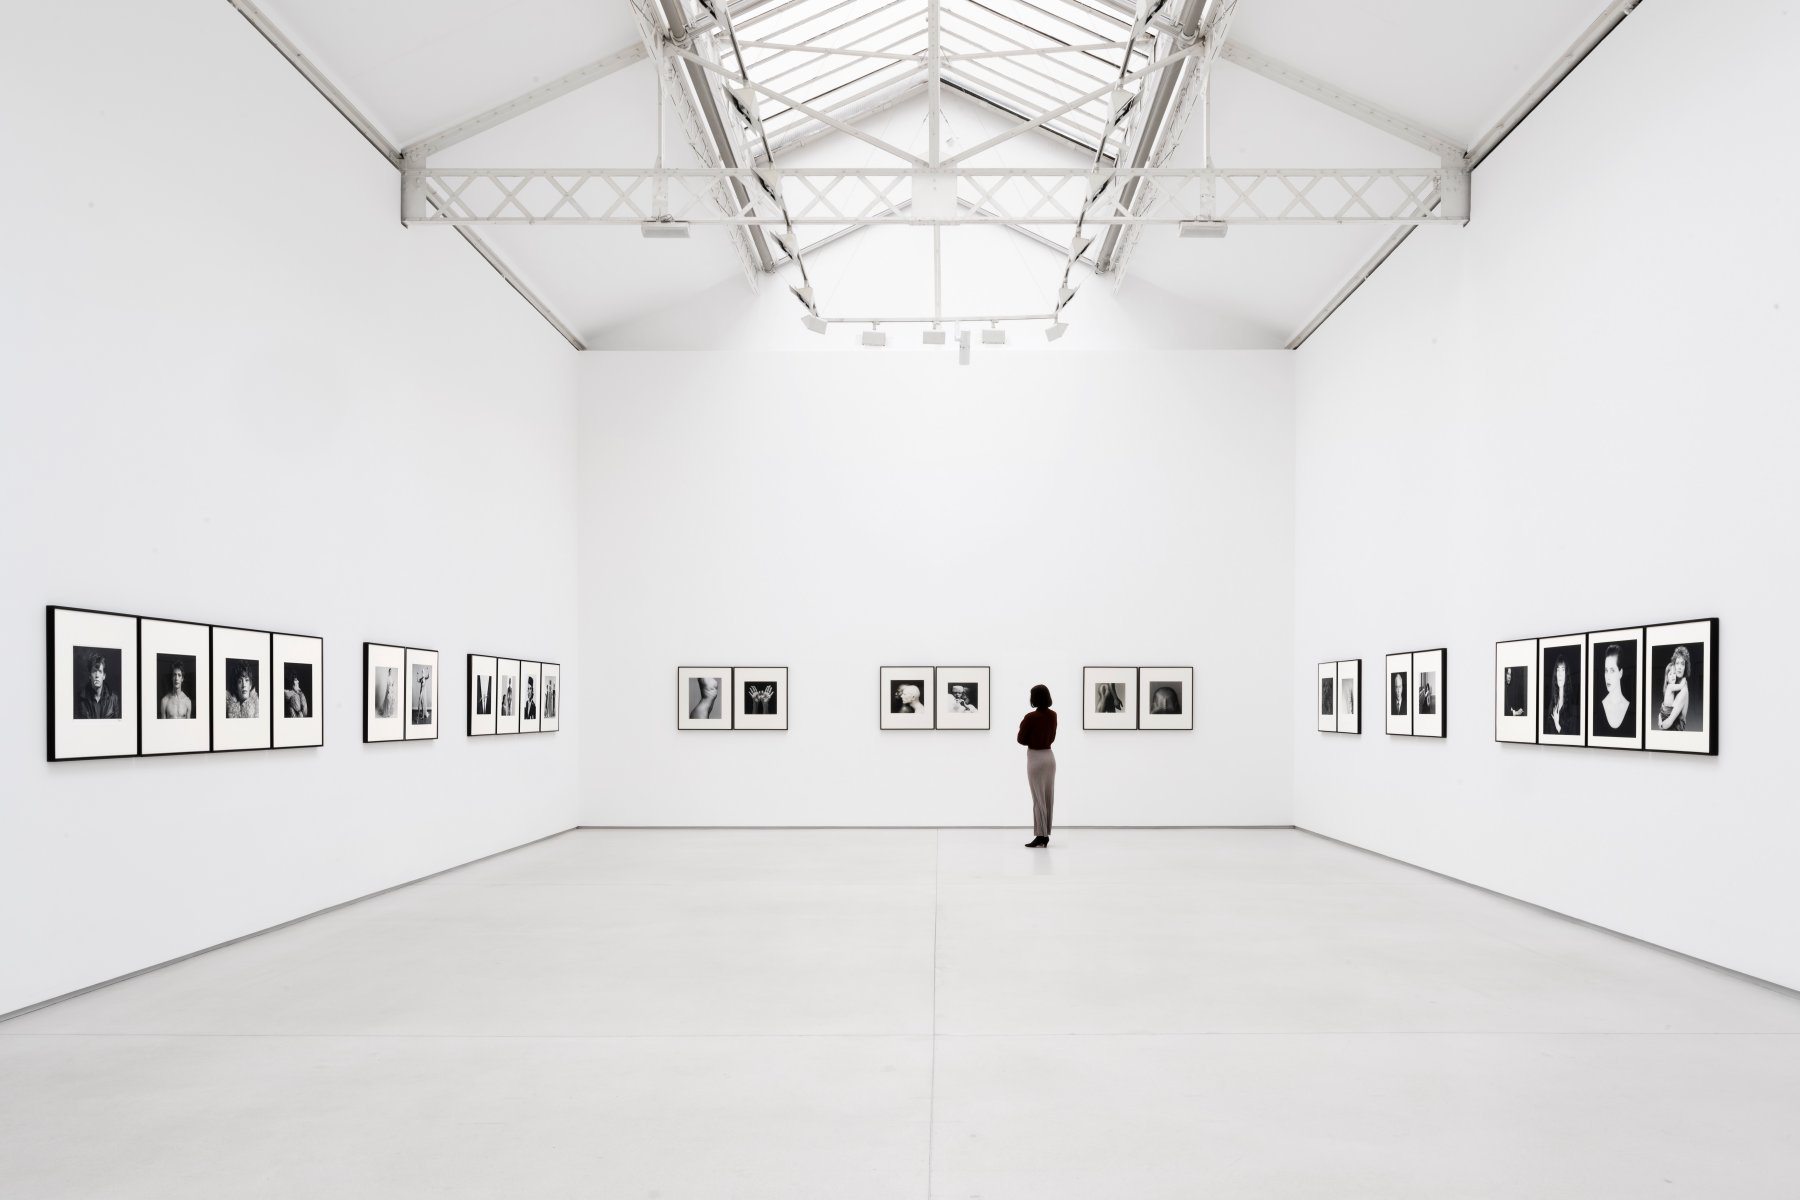 Installation image for Robert Mapplethorpe curated by Edward Enninful, at Thaddaeus Ropac